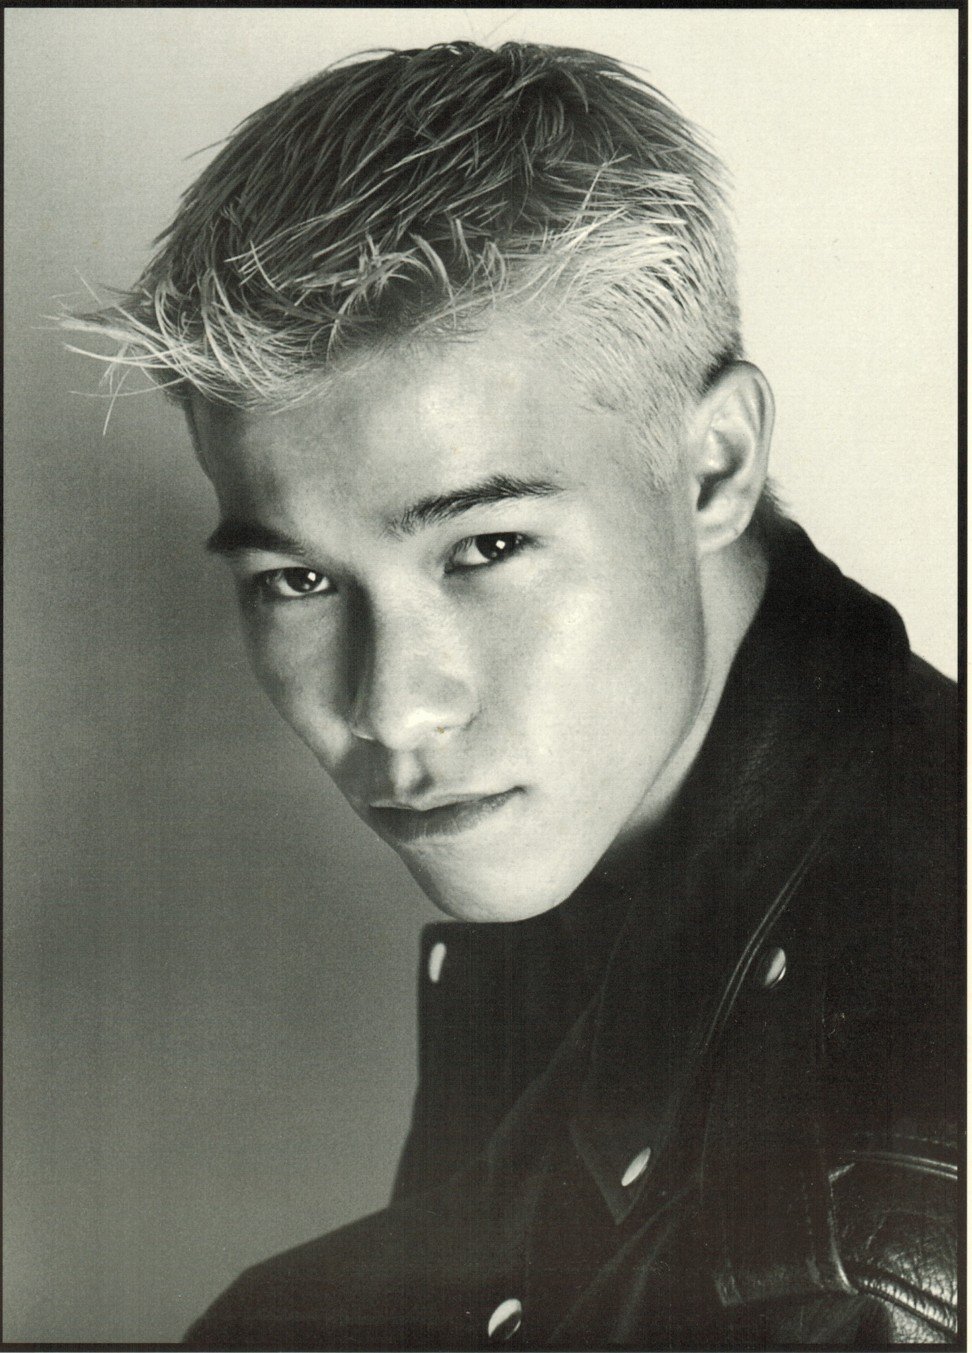 Jason Tobin as a 21-year-old actor living in Los Angeles with blond hair. Photo: Handout